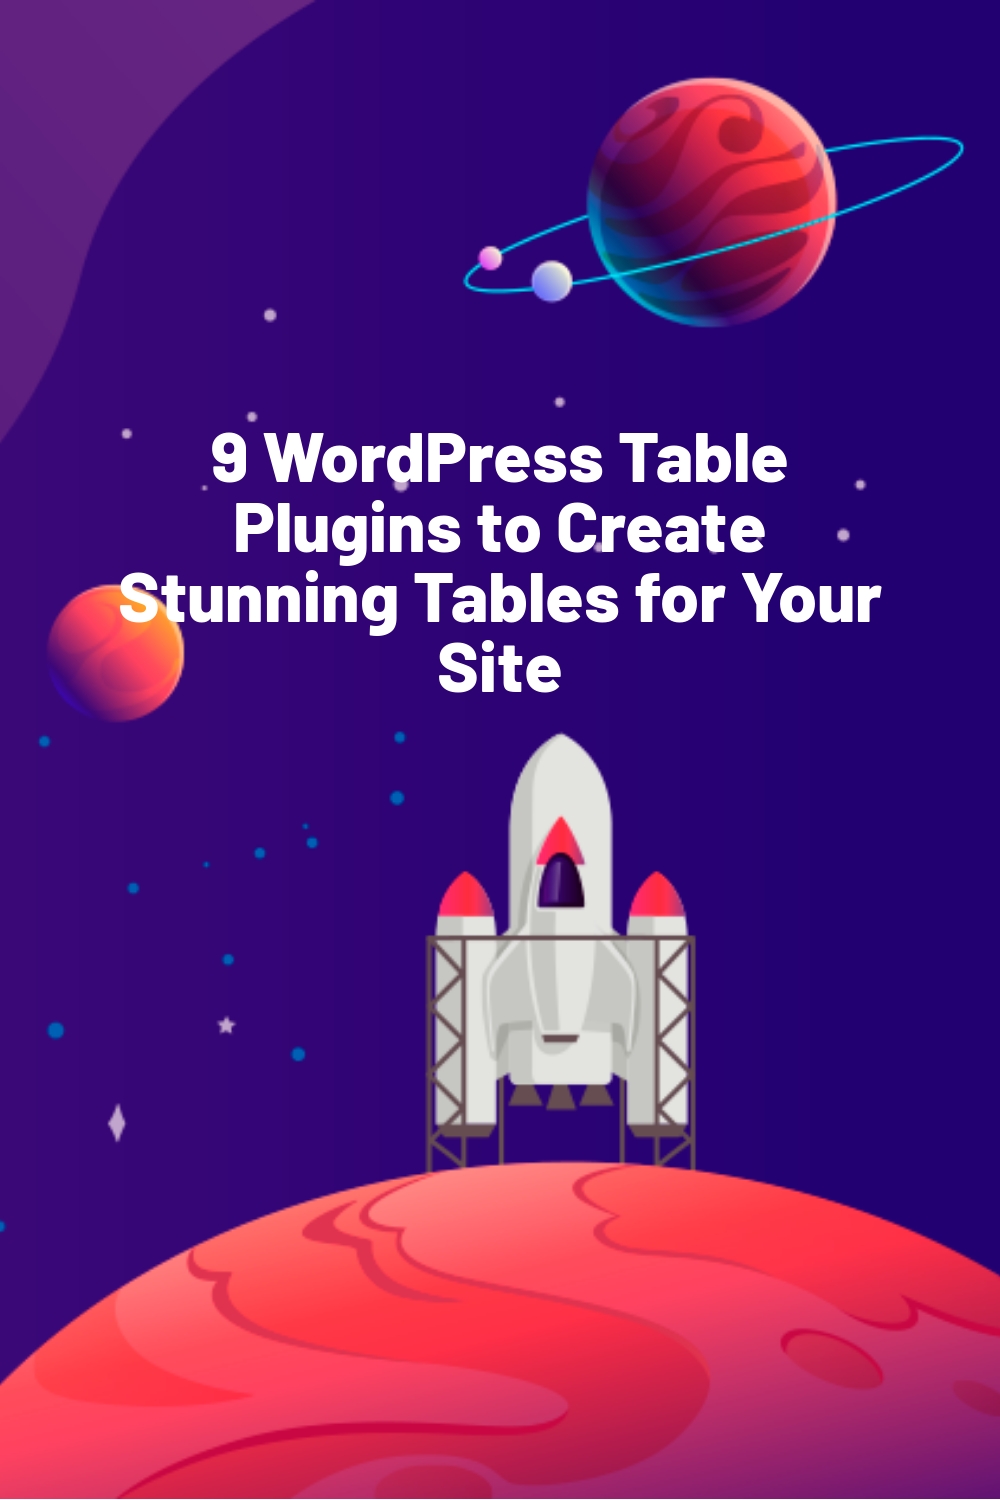 9 WordPress Table Plugins to Create Stunning Tables for Your Site